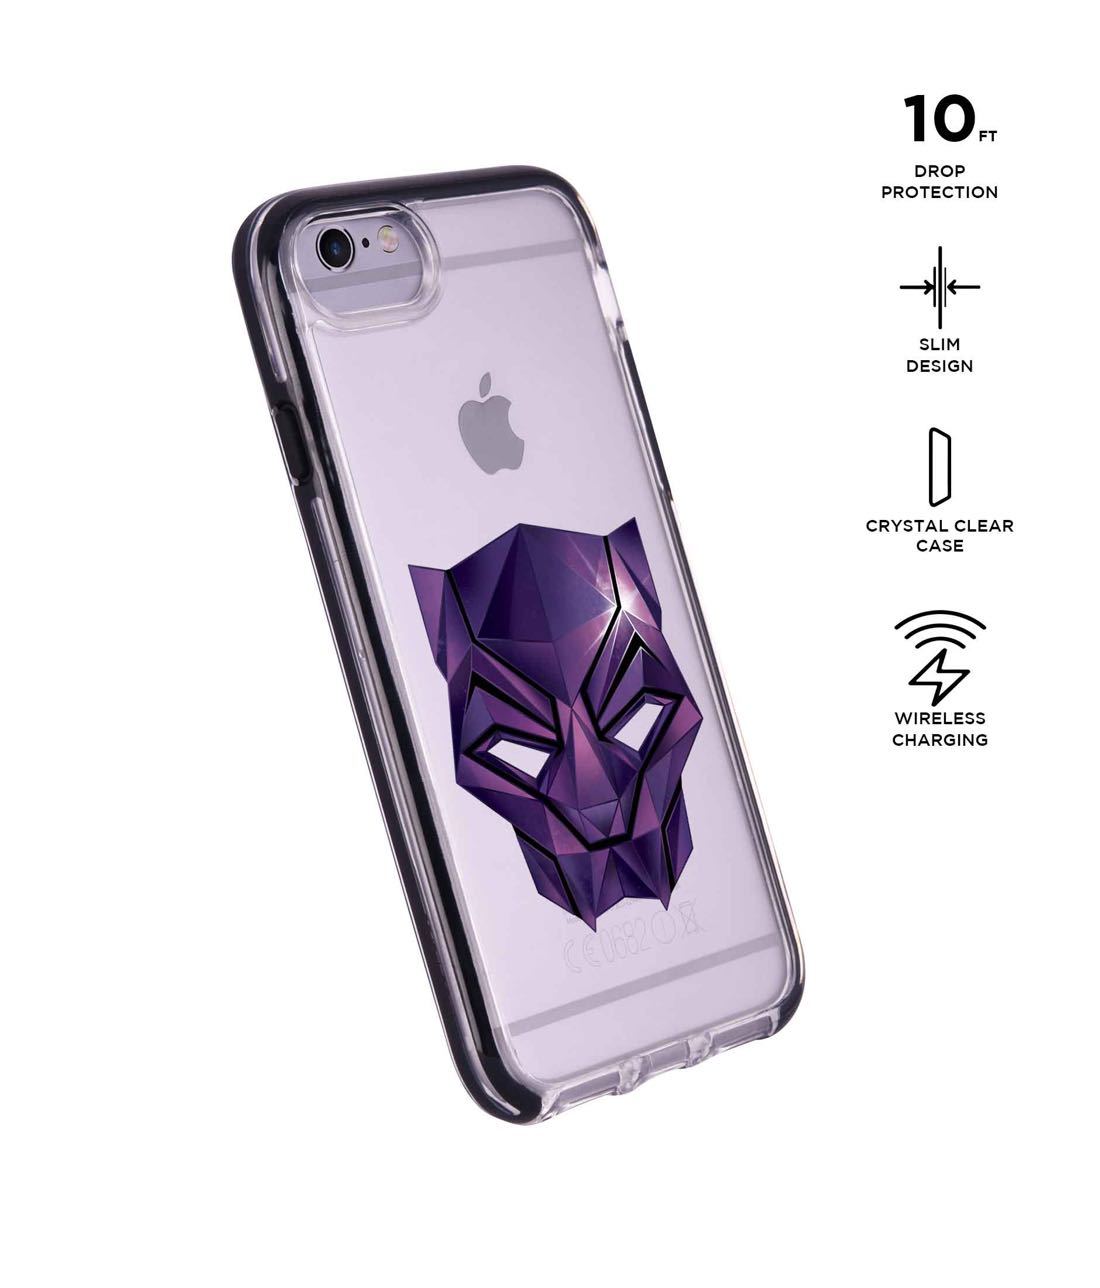 Black Panther Logo - Extreme Phone Case for iPhone 6S Plus